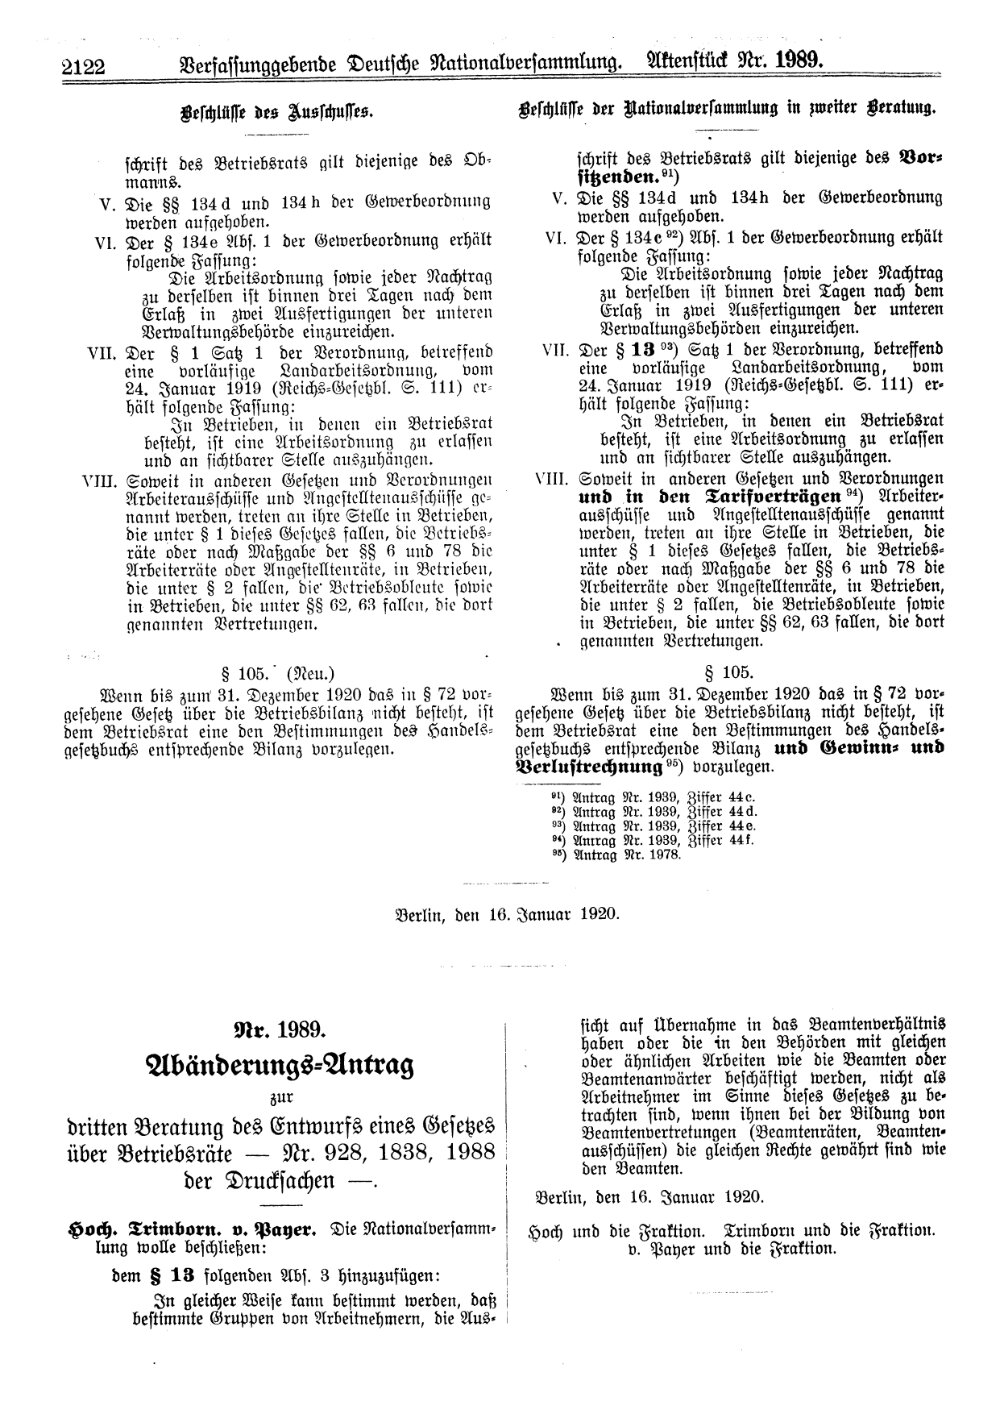 Scan of page 2122